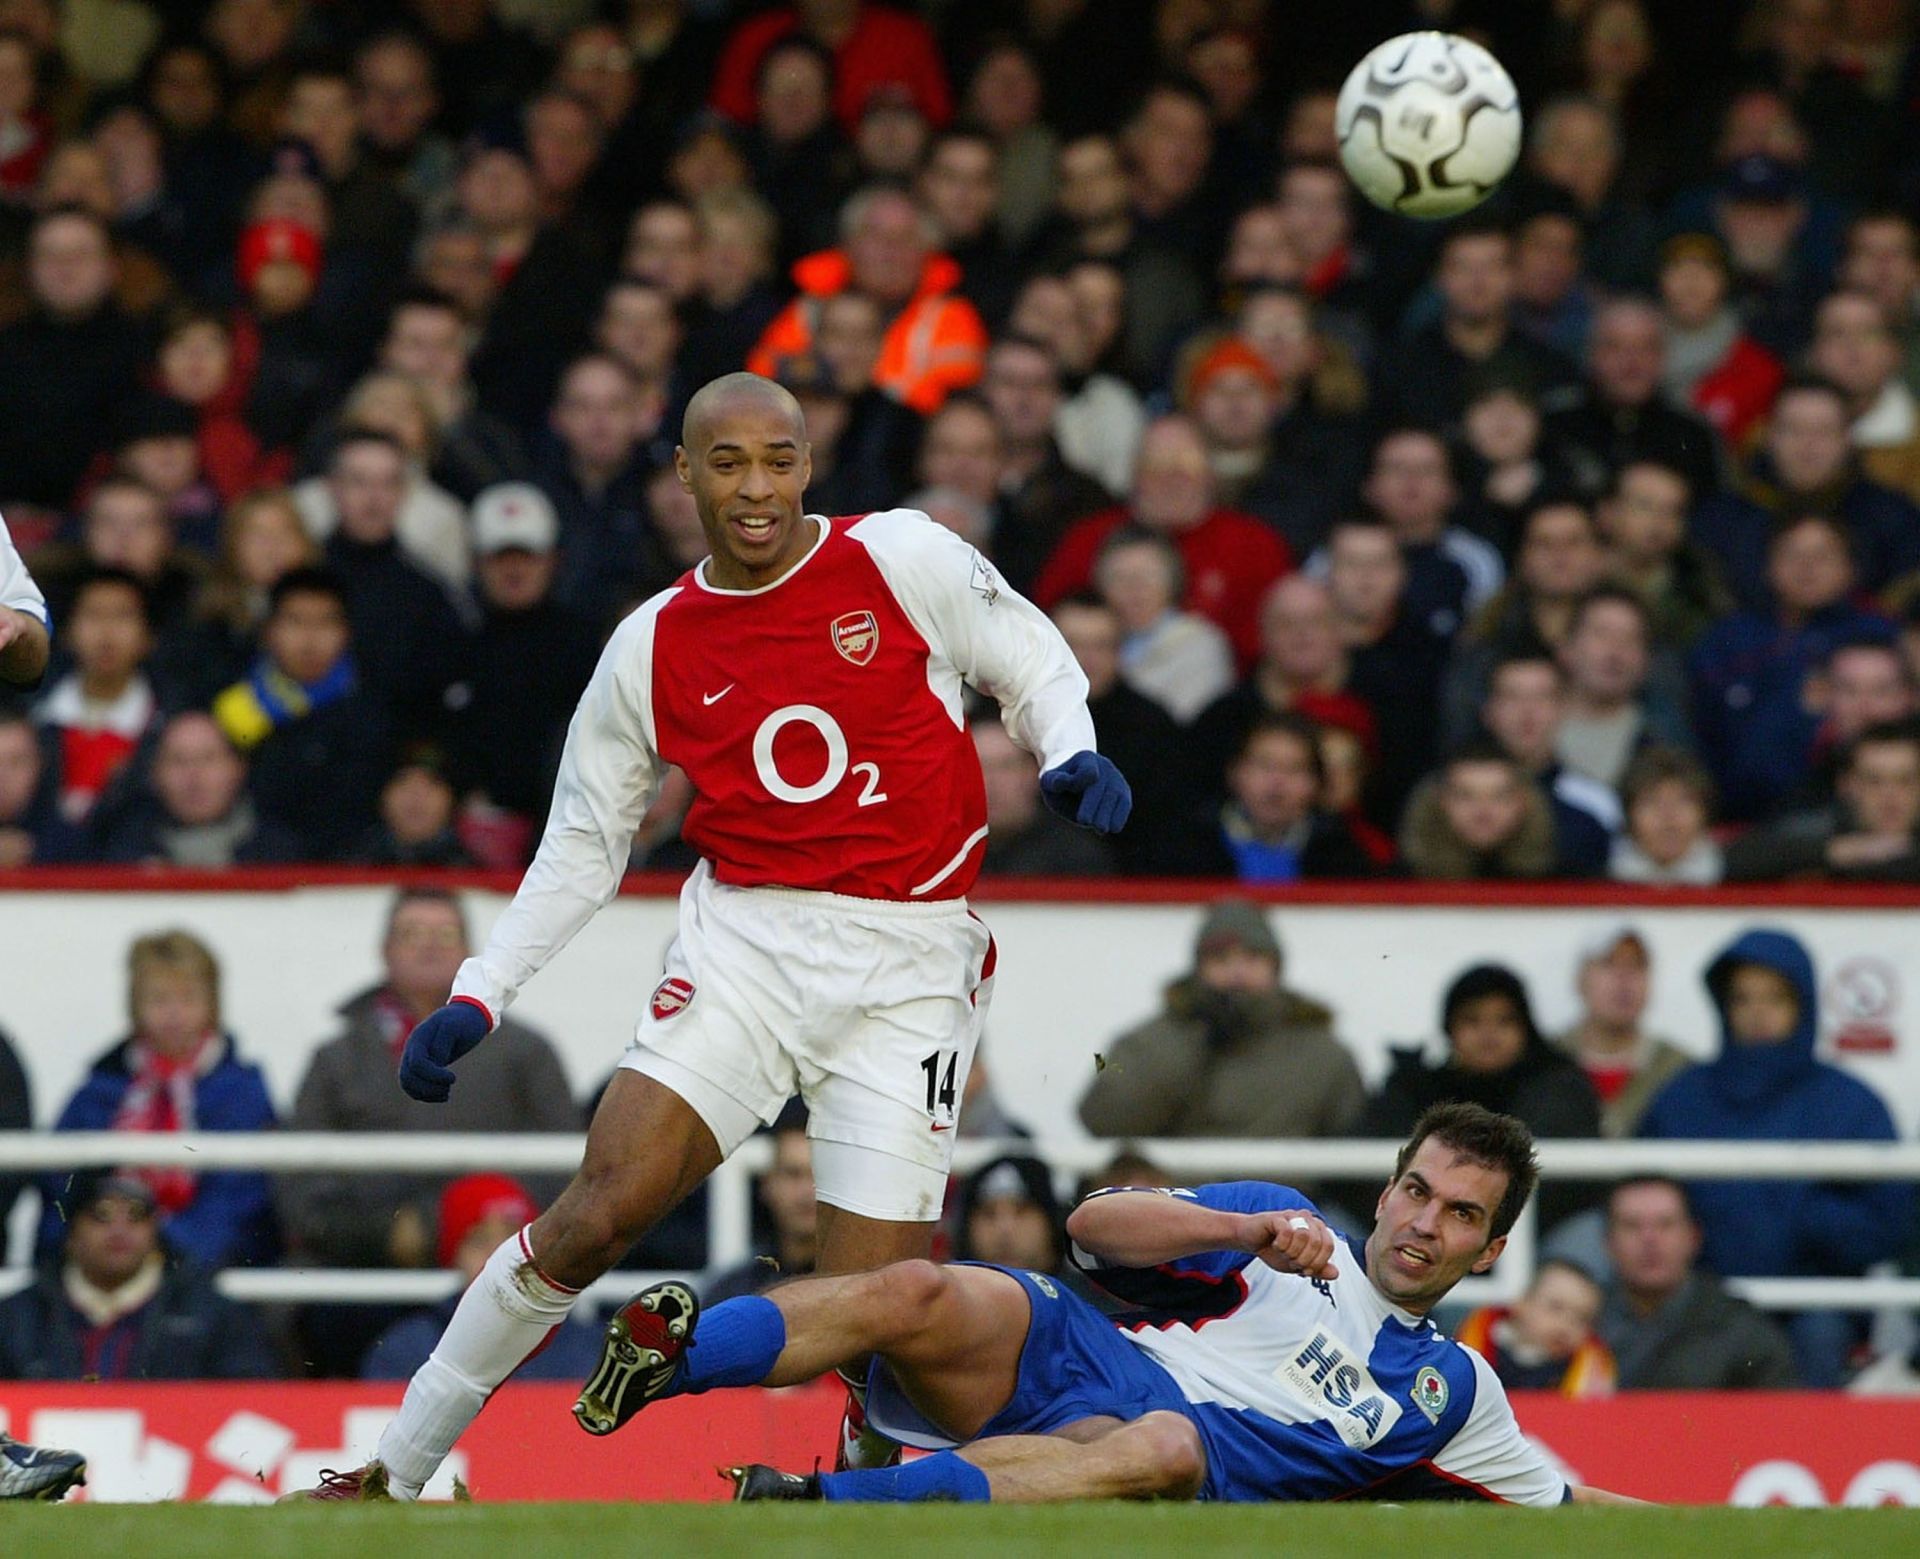 Thierry Henry is an Arsenal legend and one of the most prolific forwards in English top flight history.